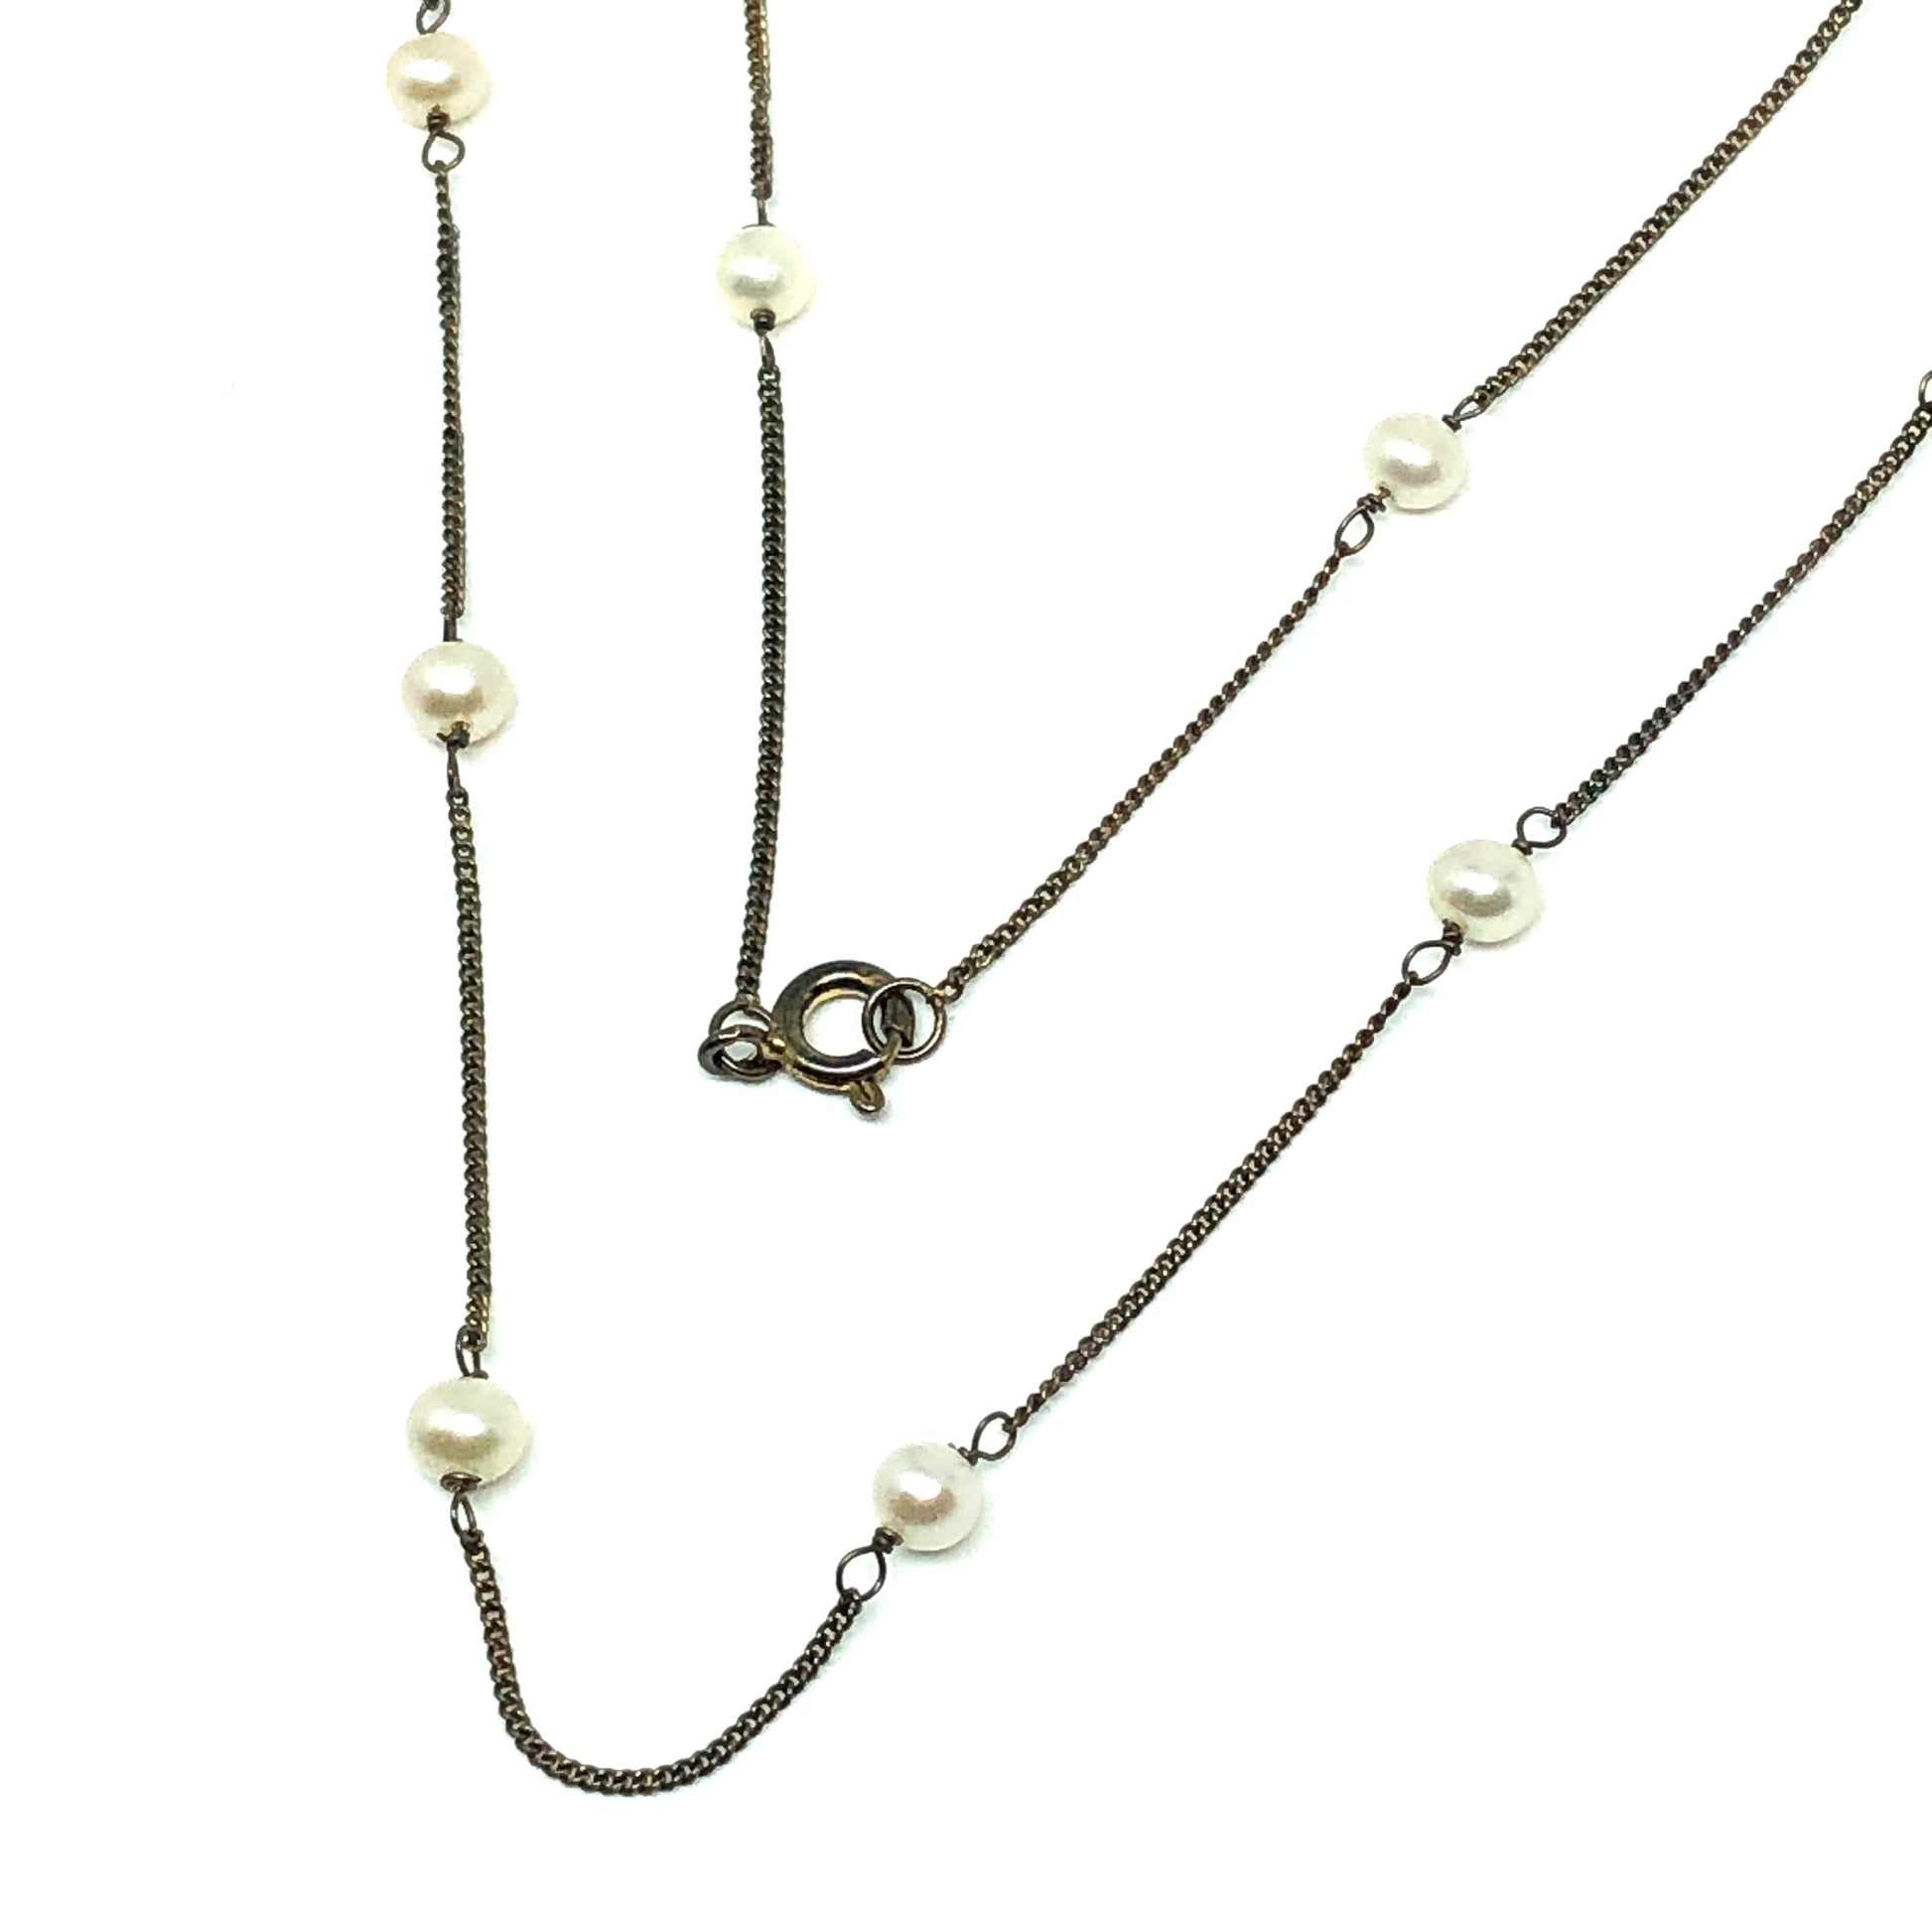 Shabby Chic Style 32" Oxidized Antiqued Gold Sterling Silver Rustic Pearl Station Necklace